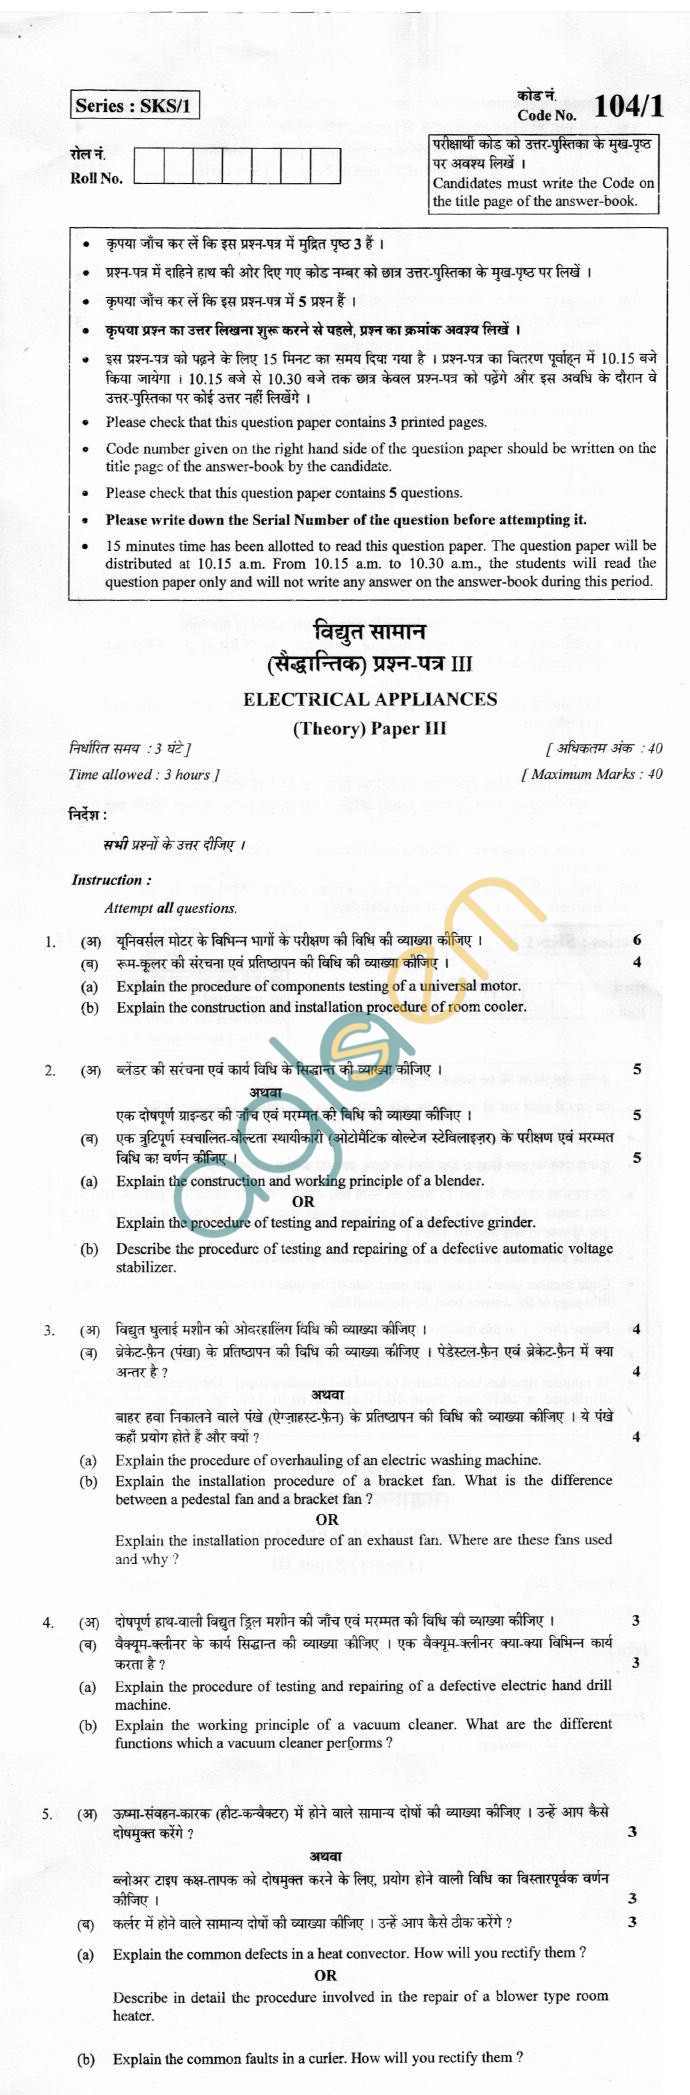 CBSE Board Exam 2013 Class XII Question Paper - Electrical Appliances Paper III